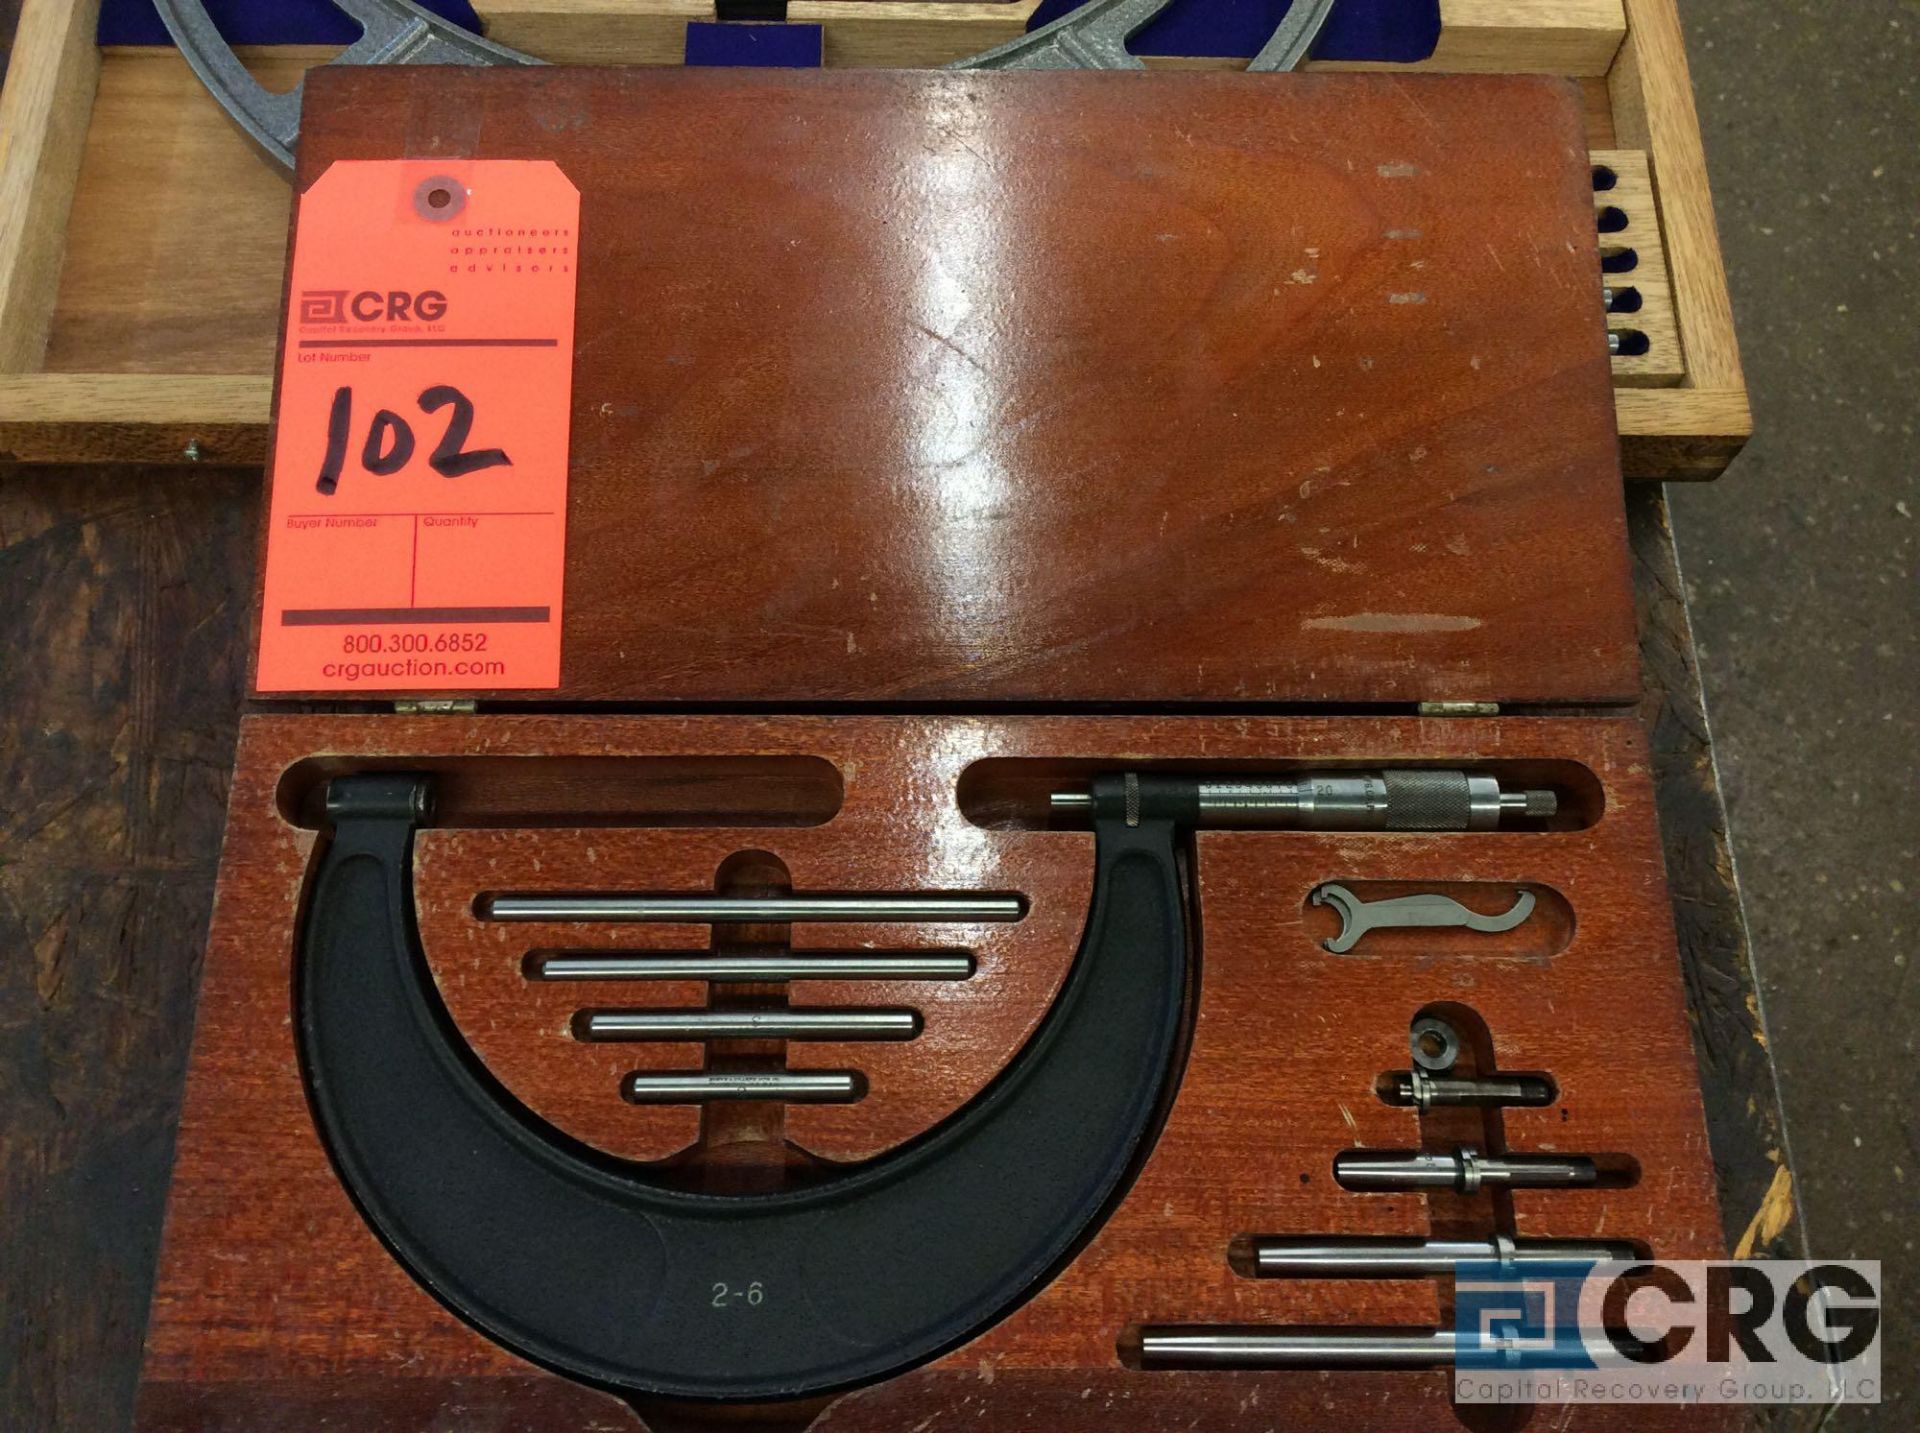 Brown and Sharpe 2-6 inch O.D. micrometer with wood case (LOCATED IN TOOL ROOM MACHINE SHOP)